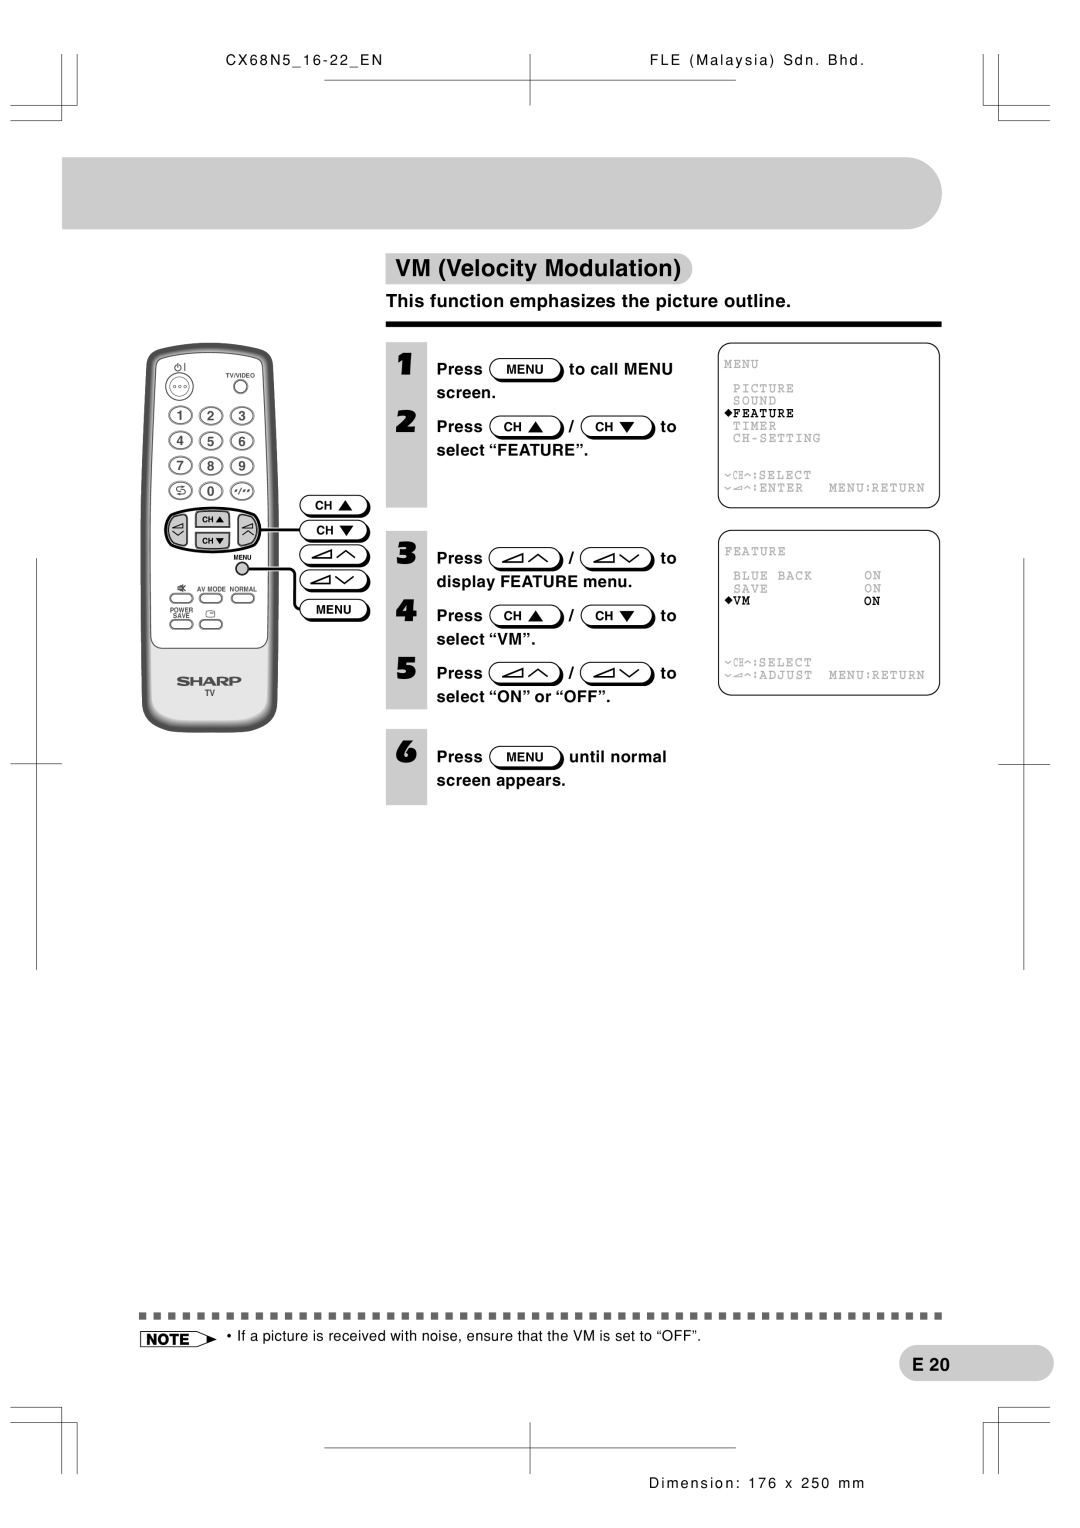 Sharp Cx68n5 operation manual VM Velocity Modulation, This function emphasizes the picture outline 